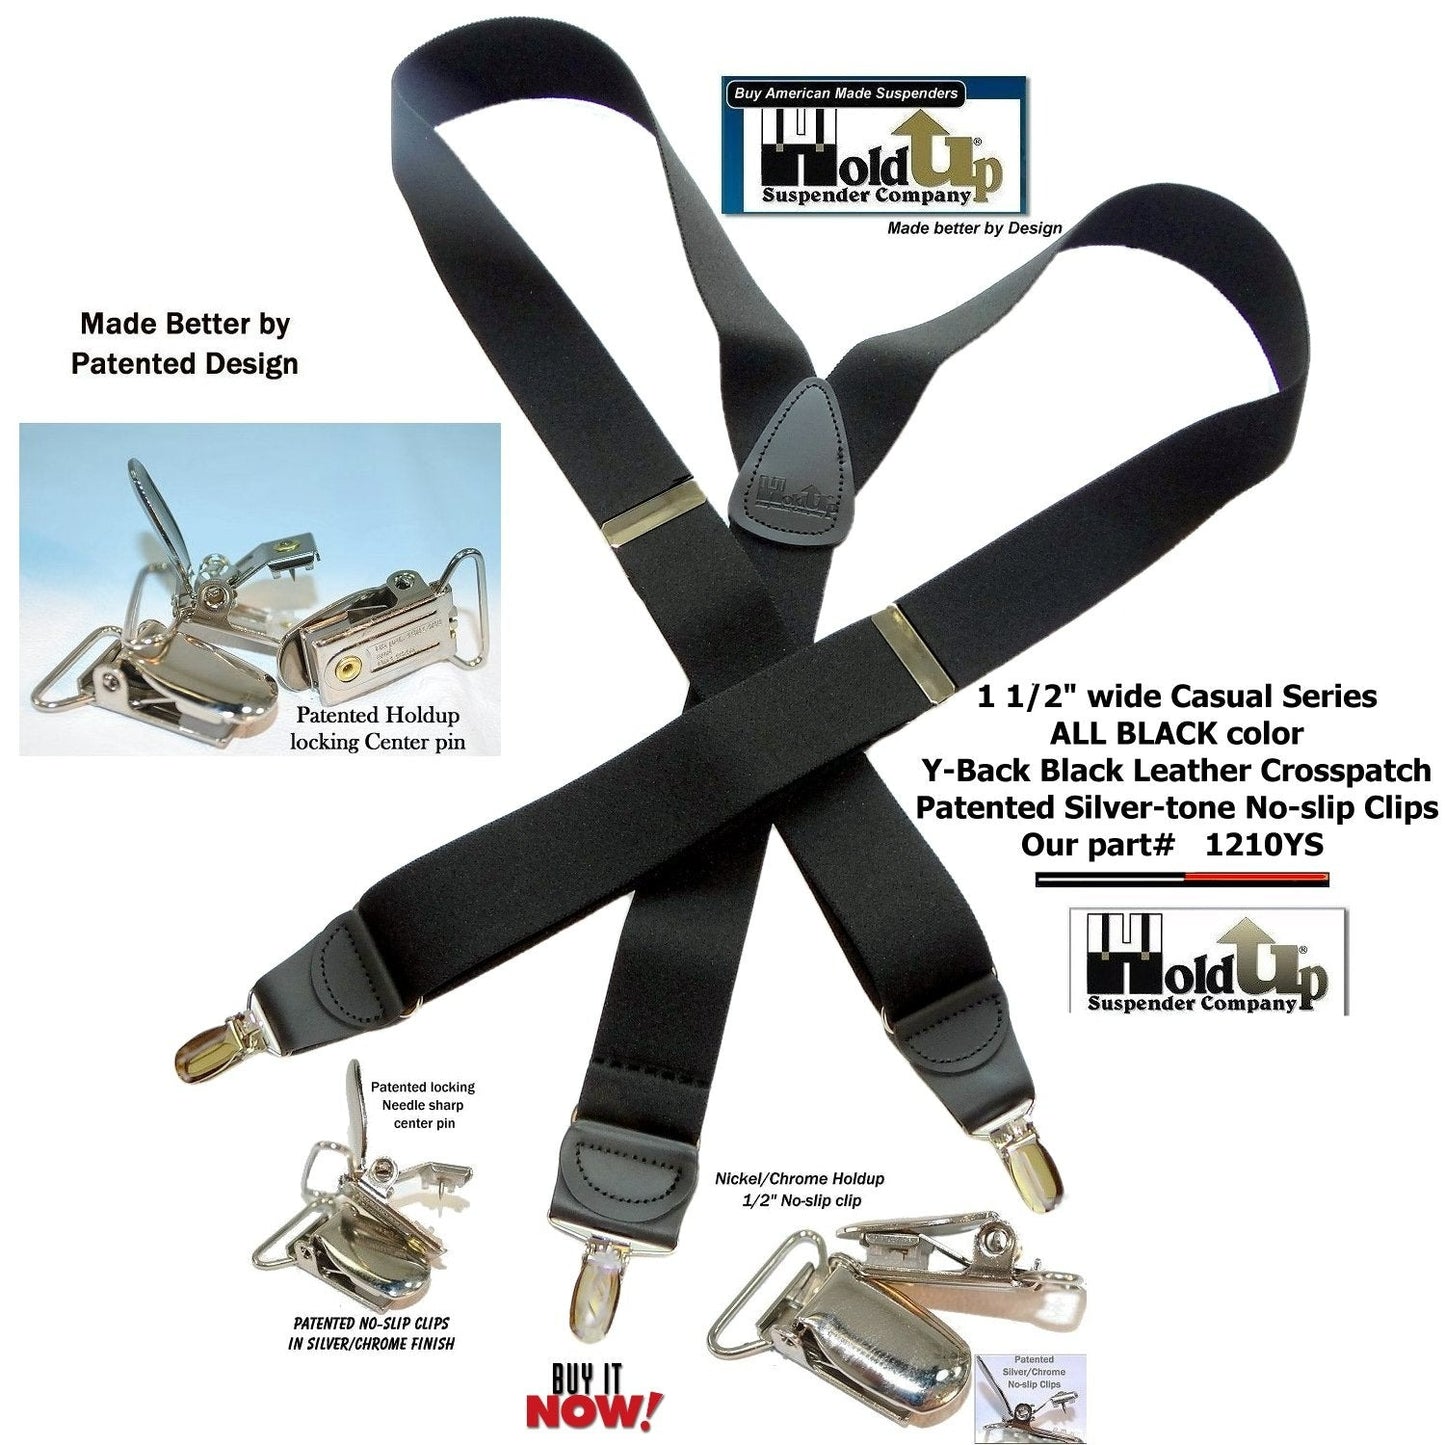 HoldUp Brand All Black Casual Series Y-back Suspenders with patented silver No-Slip clips